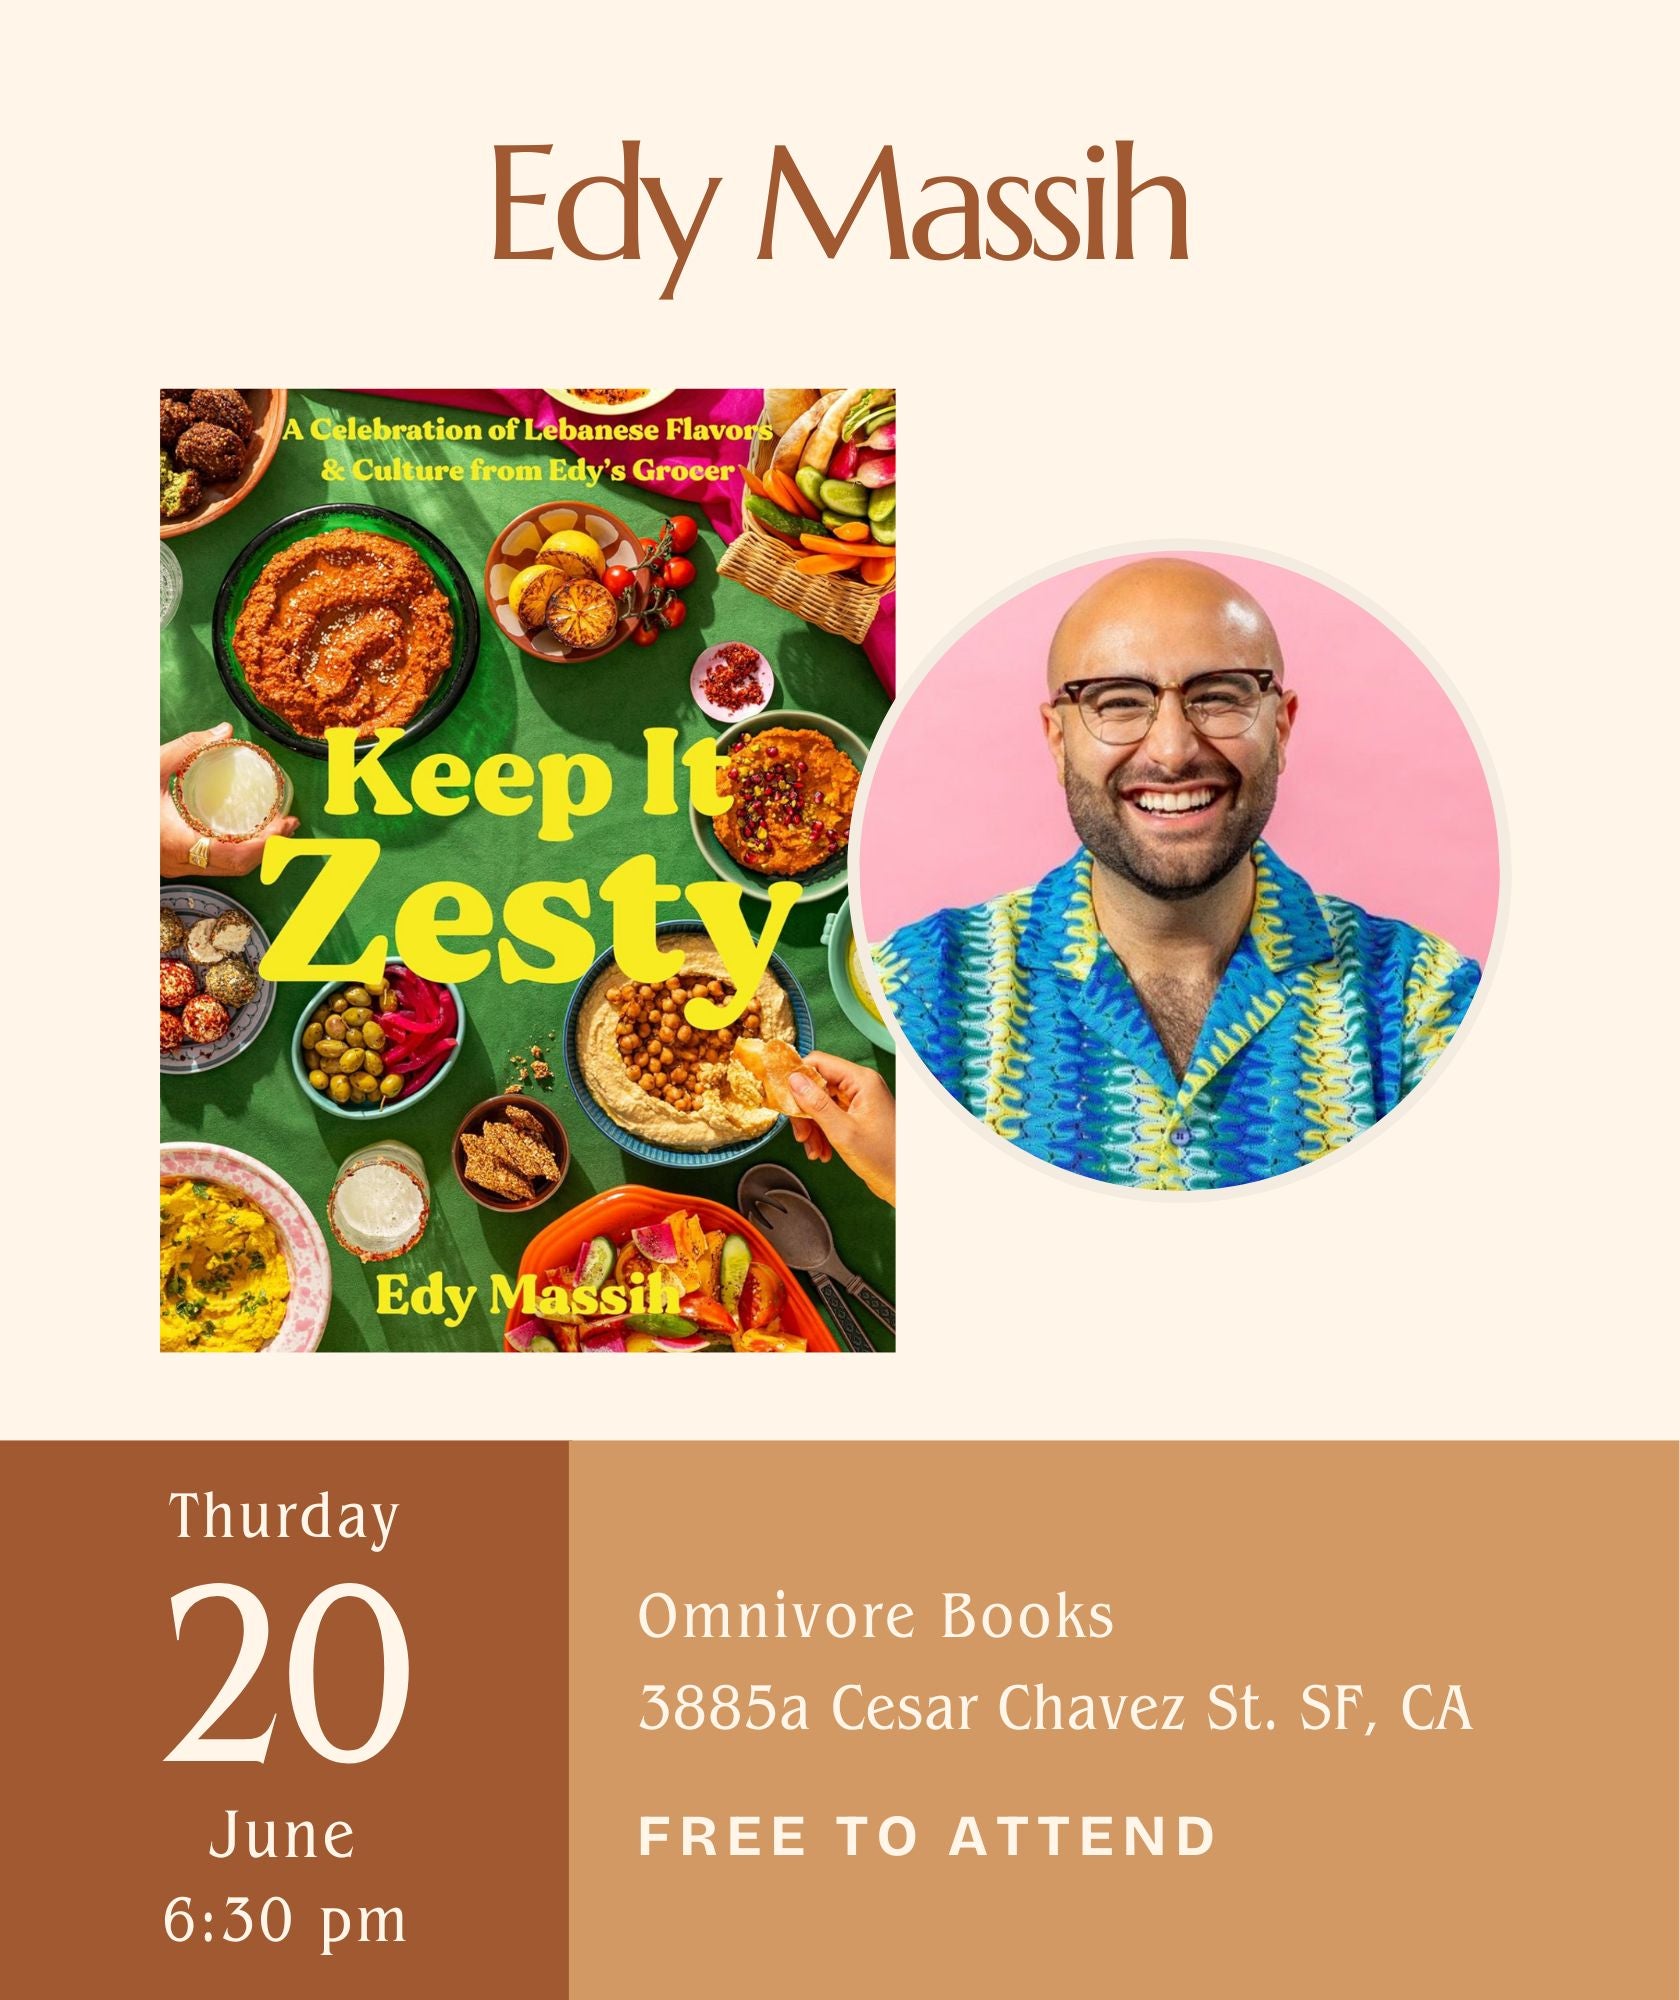 Edy Massih Author Talk •  Keep It Zesty: A Celebration of Lebanese Flavors & Culture from Edy's Grocer